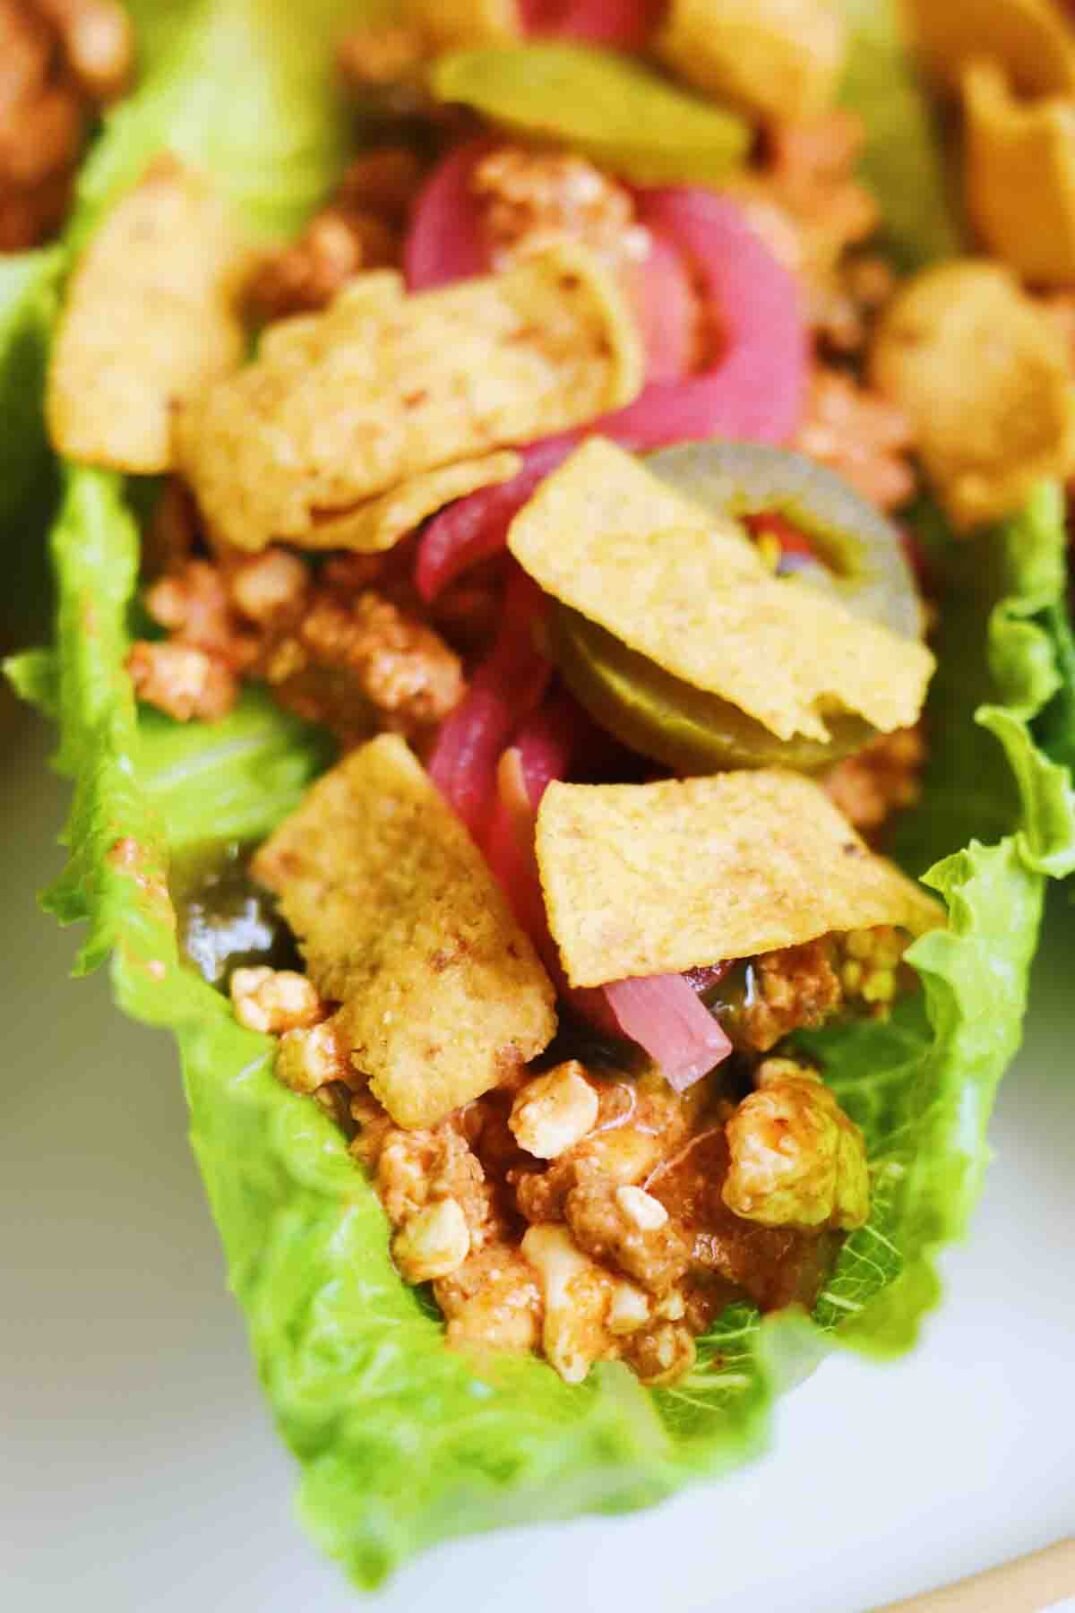 an up close view of a piece of lettuce stuffed with taco meat and cottage cheese and colorful toppings.